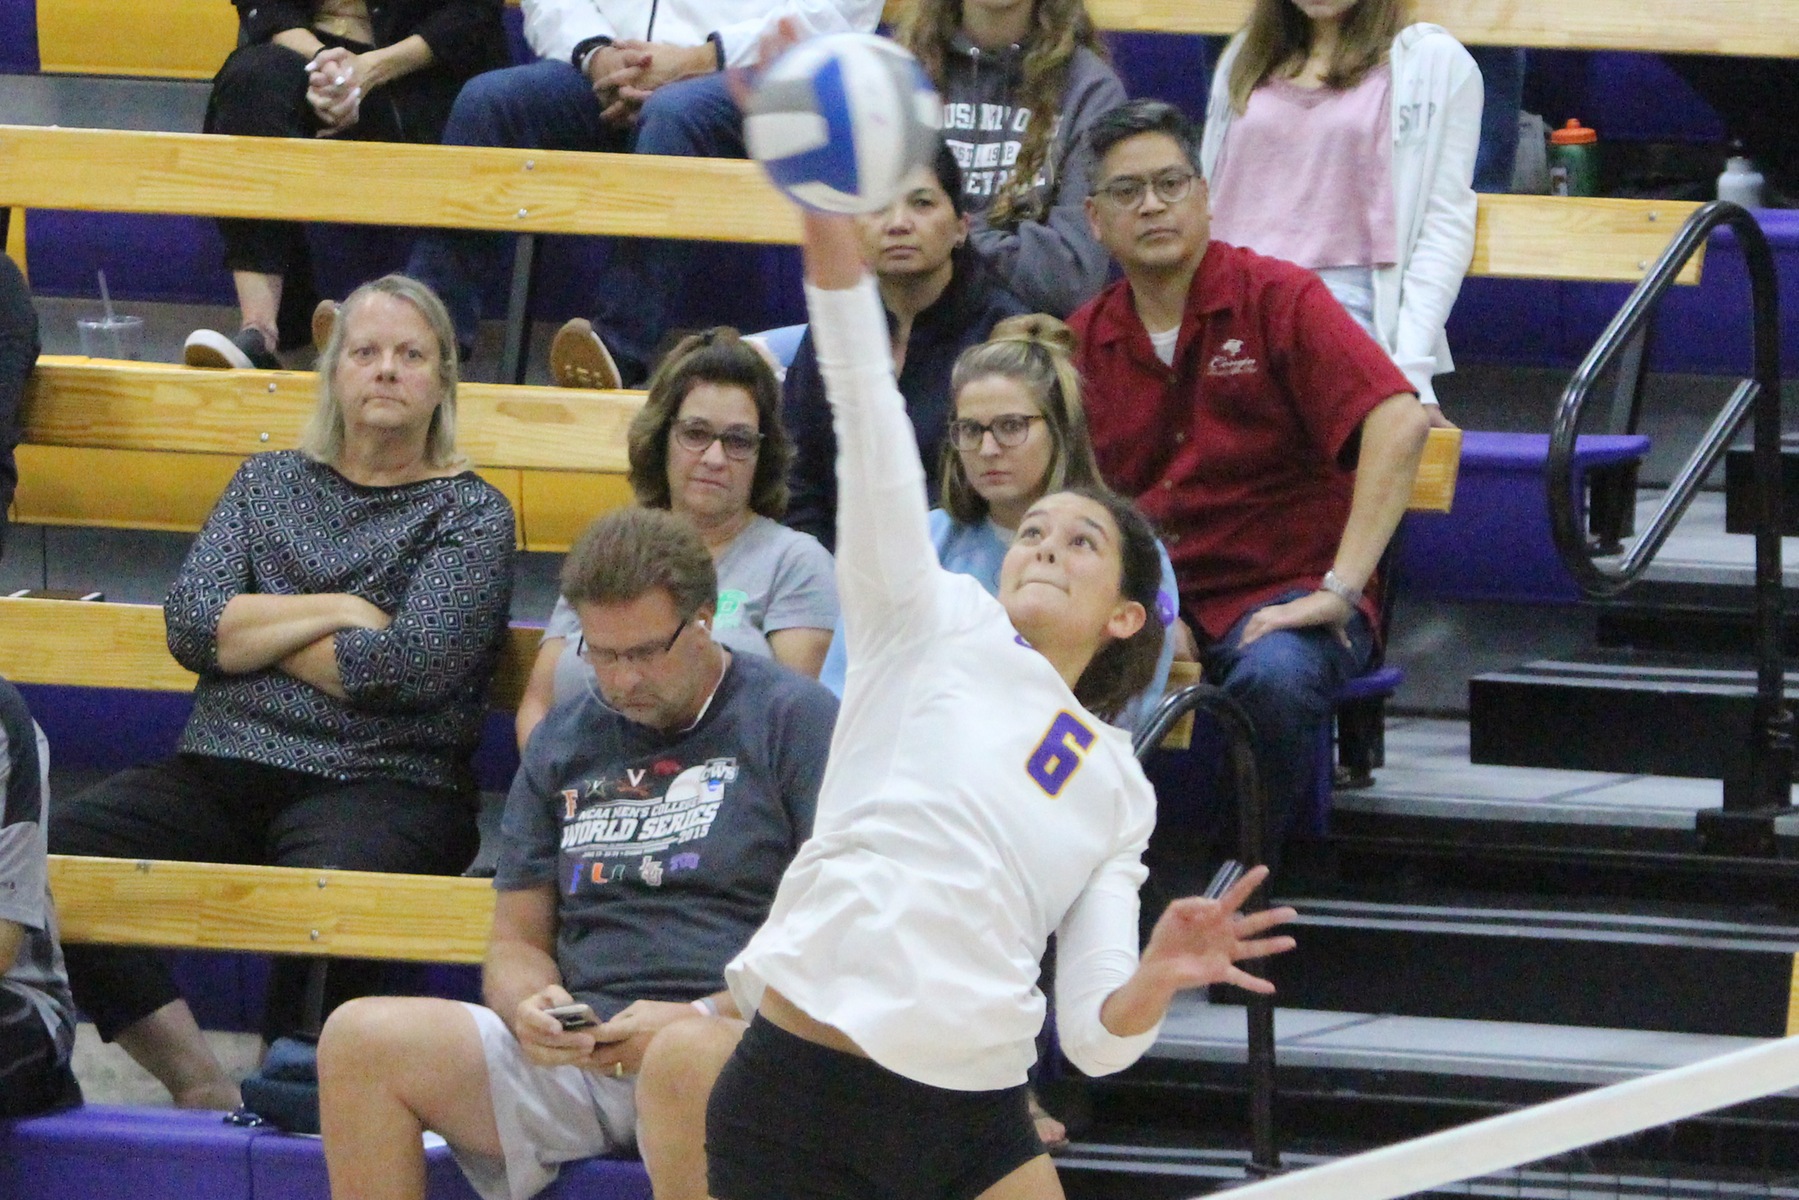 Mackenzie Martinez recorded her second double-double of the year with 10 kills and 12 digs.